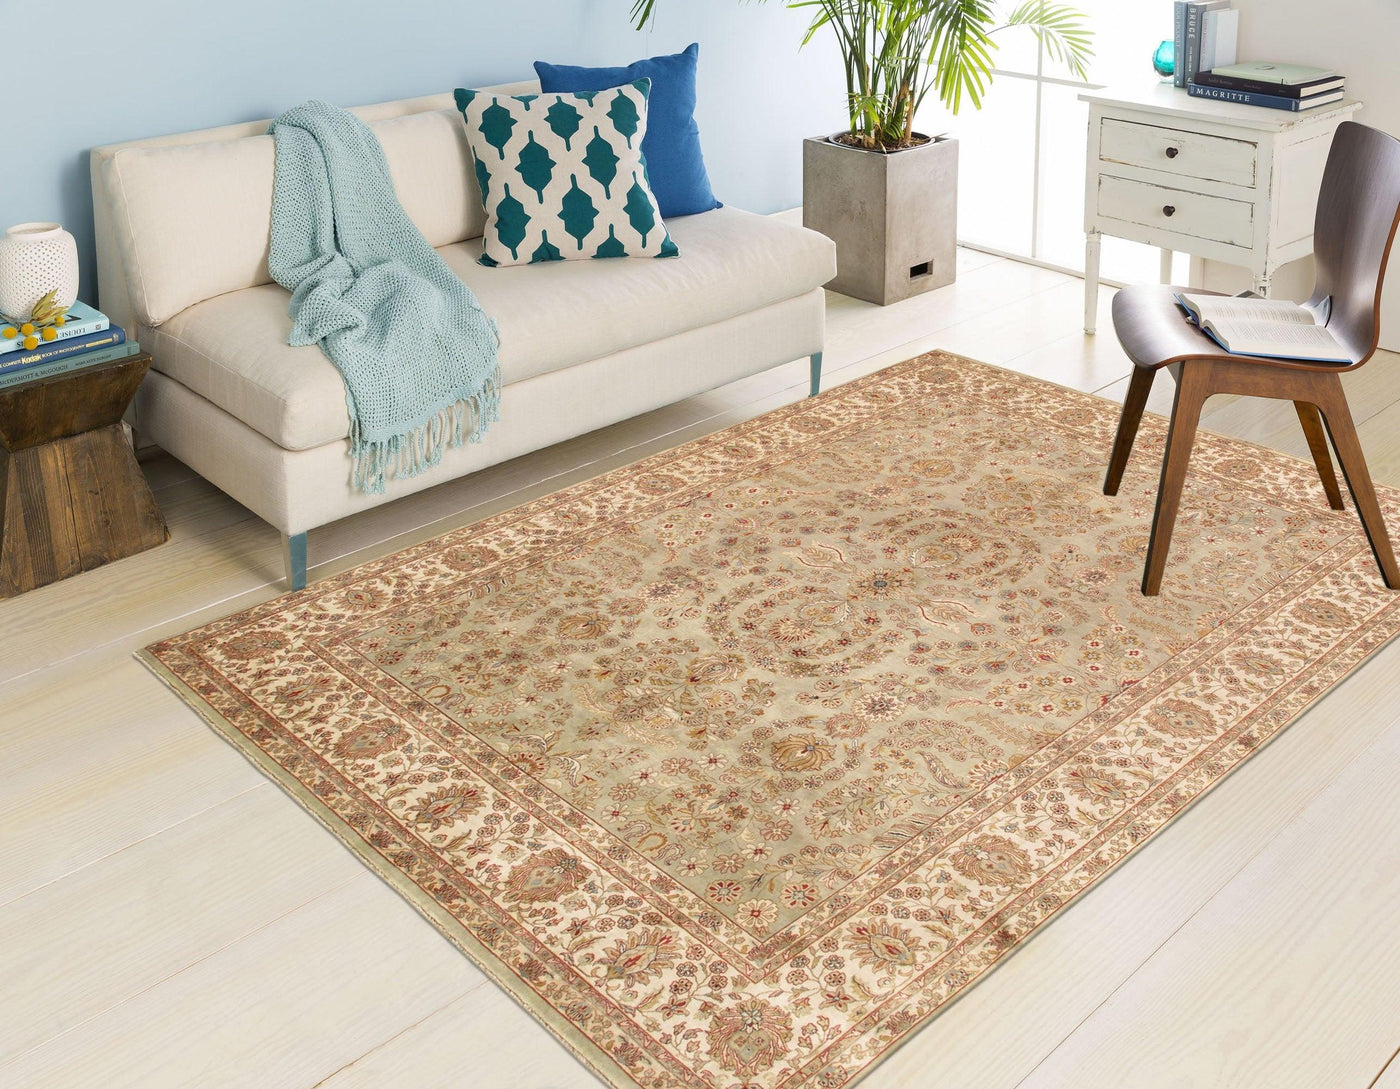 Canvello Tabriz Hand-Knotted Lamb's Wool Area Rug- 8'10" X 11'11"